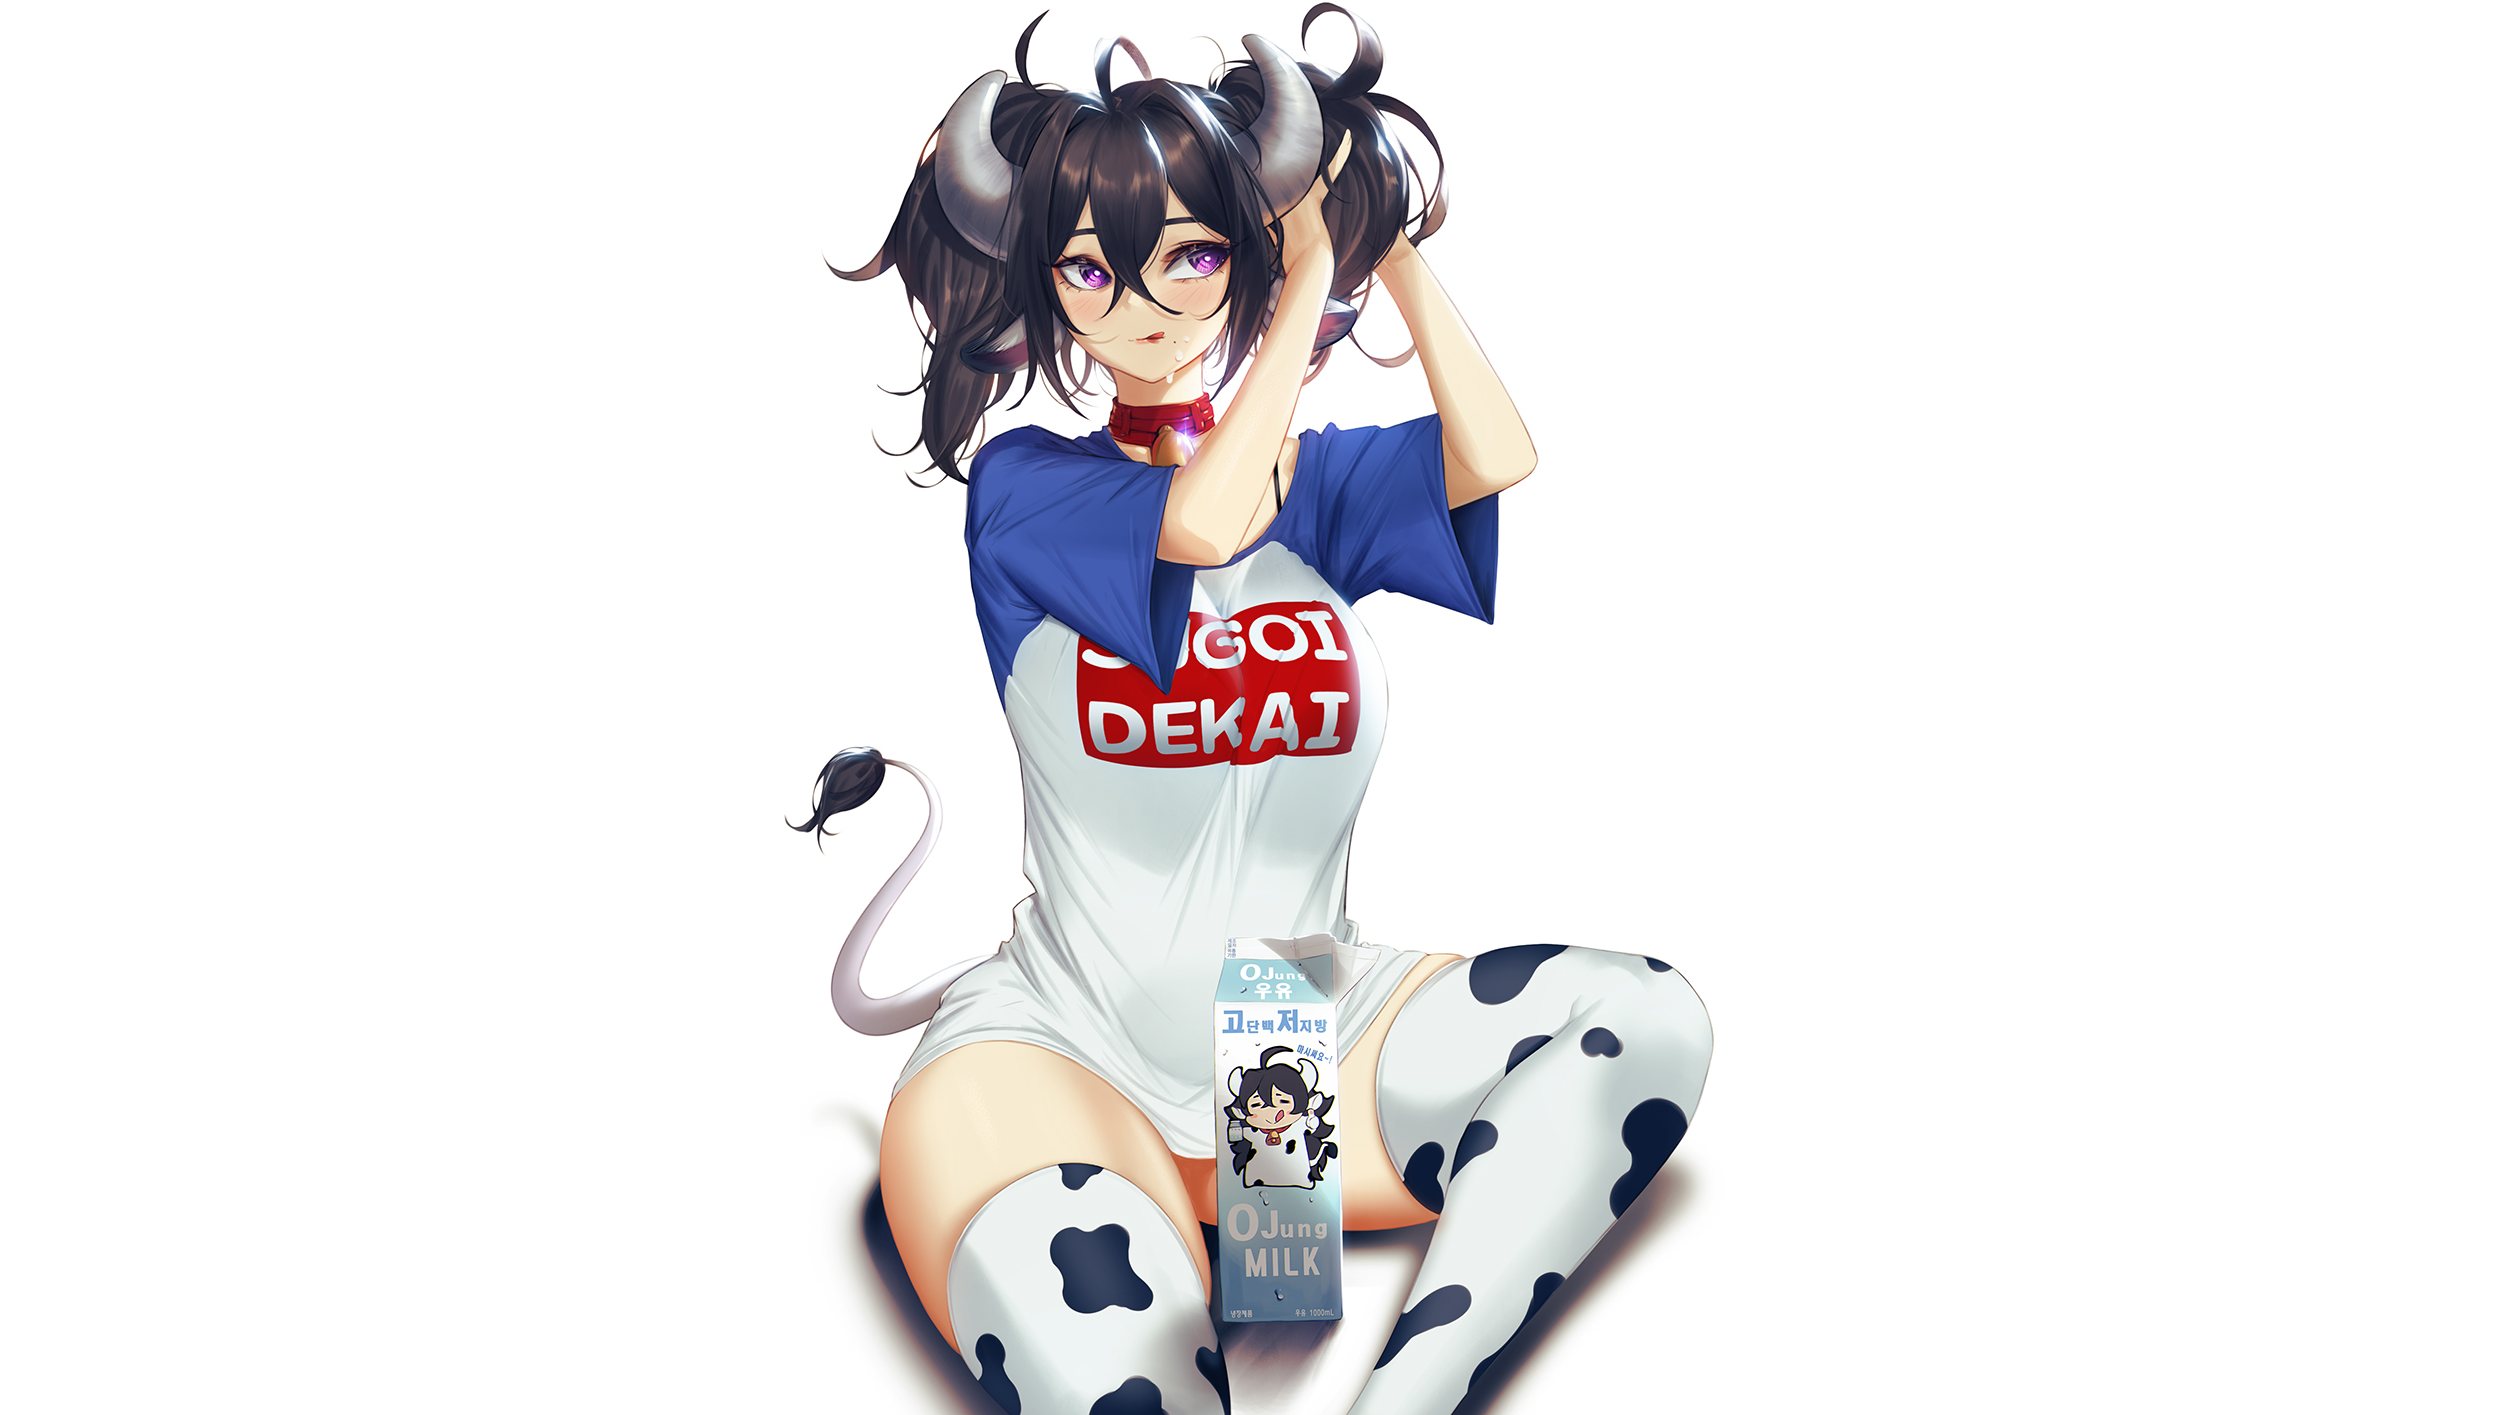 Anime 2516x1415 cow girl original characters fantasy girl horns blushing milk T-shirt stockings white background simple background artwork 2D drawing anime anime girls blueorca tail